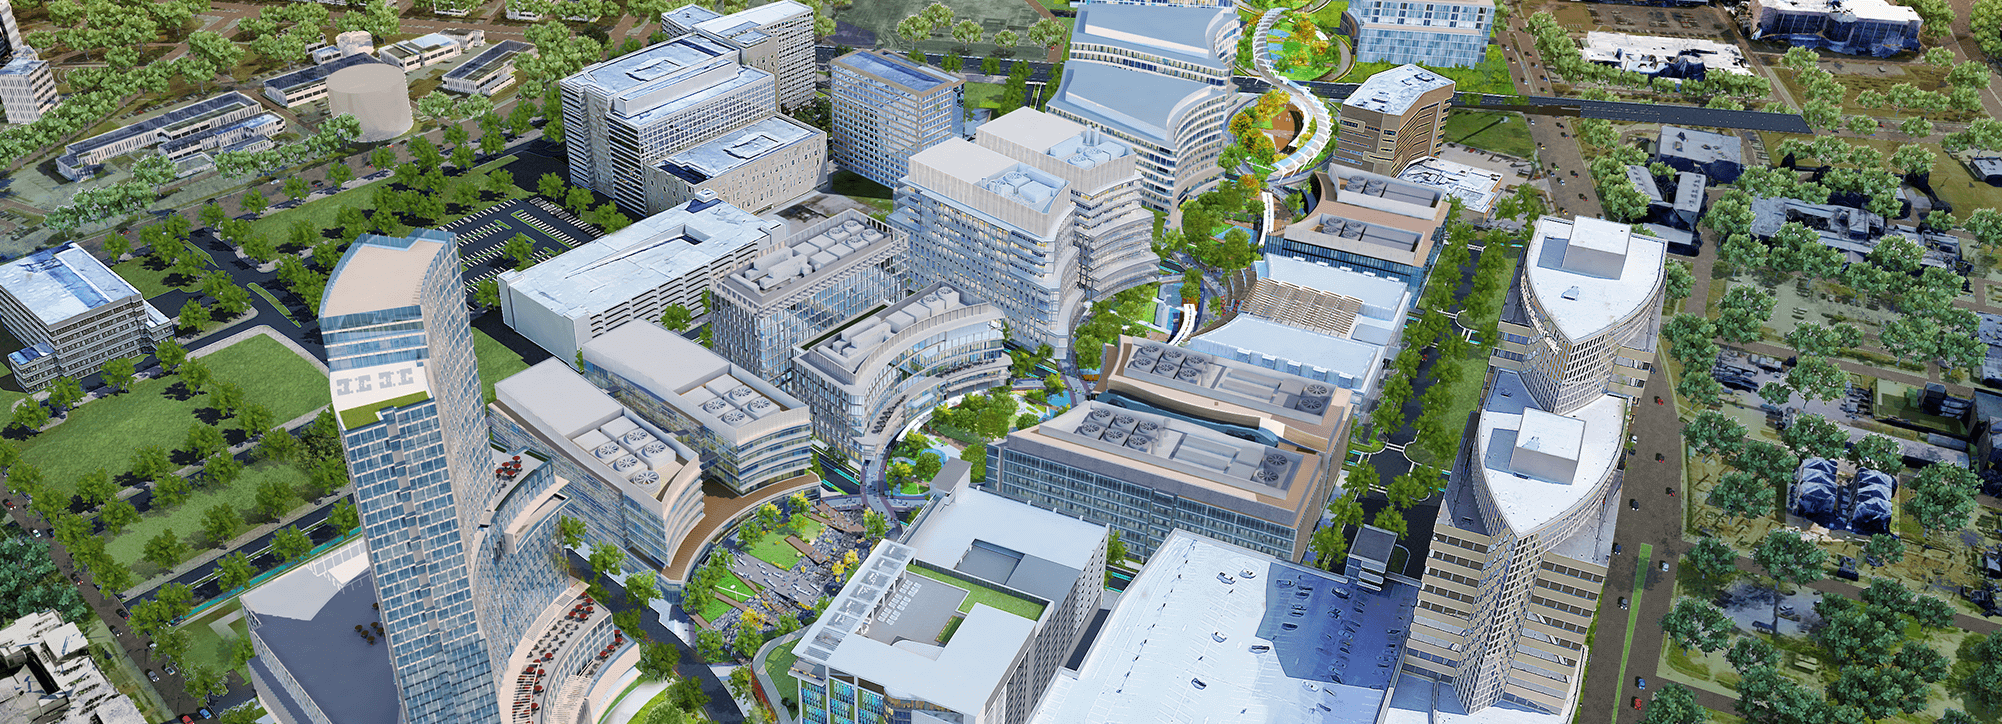 Ariel view of new Texas Medical Center Campus